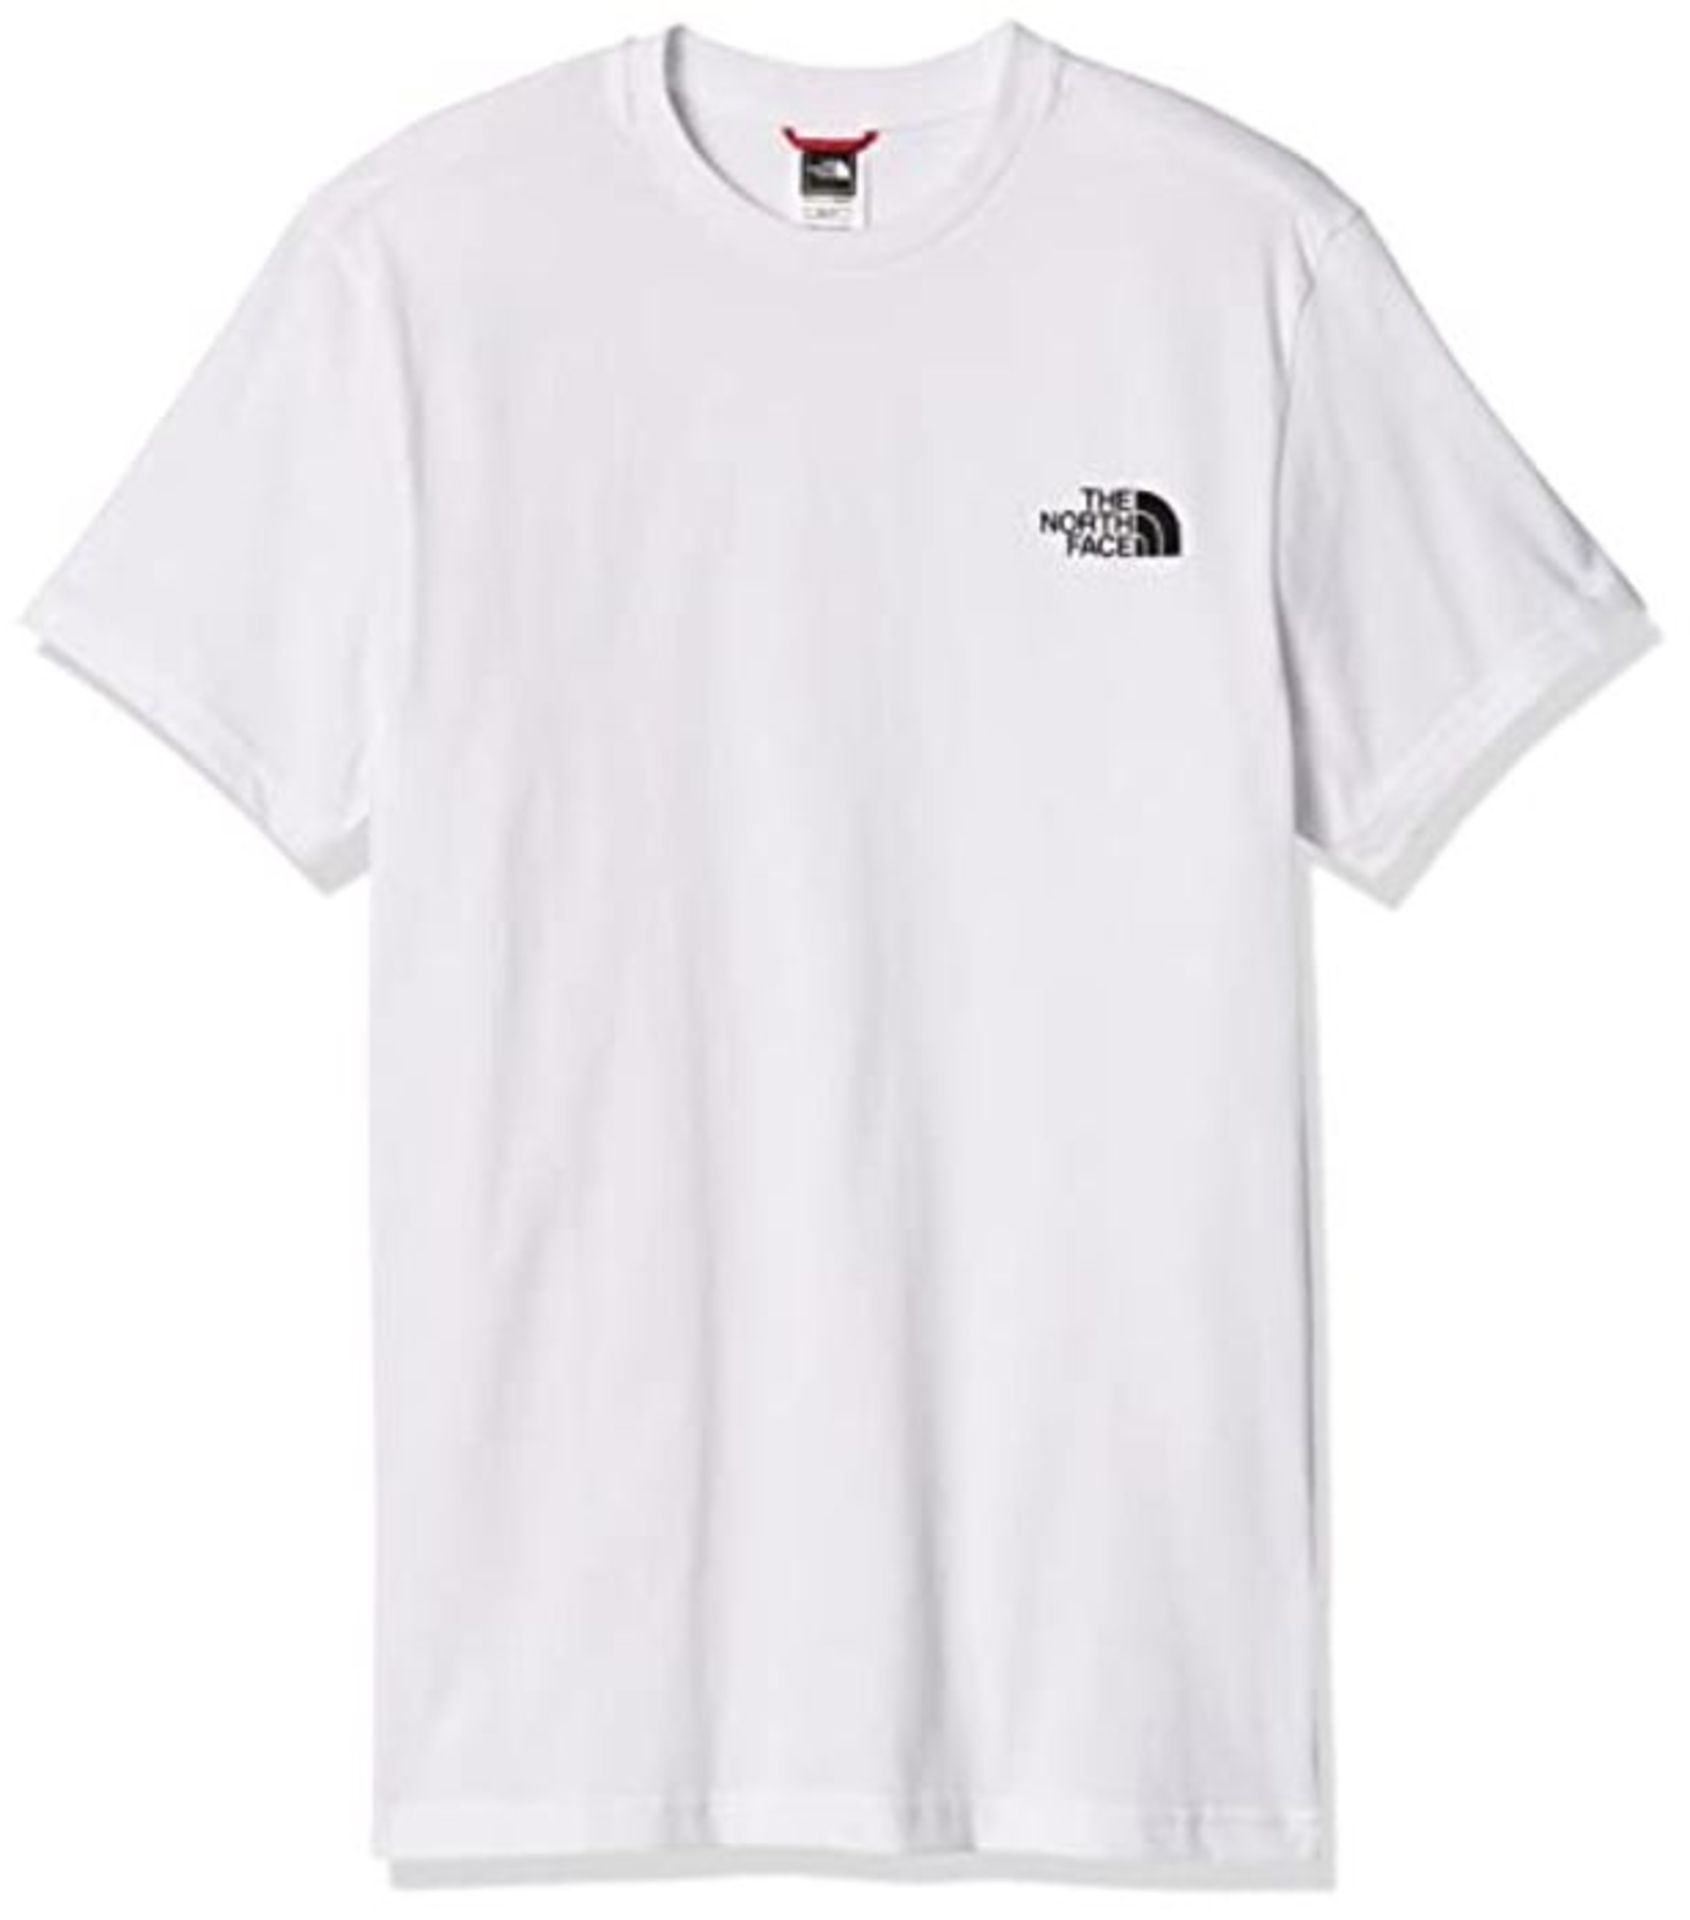 The North Face Men Simple Dome Short Sleeved T-Shirt, White (White/tnf White), Small